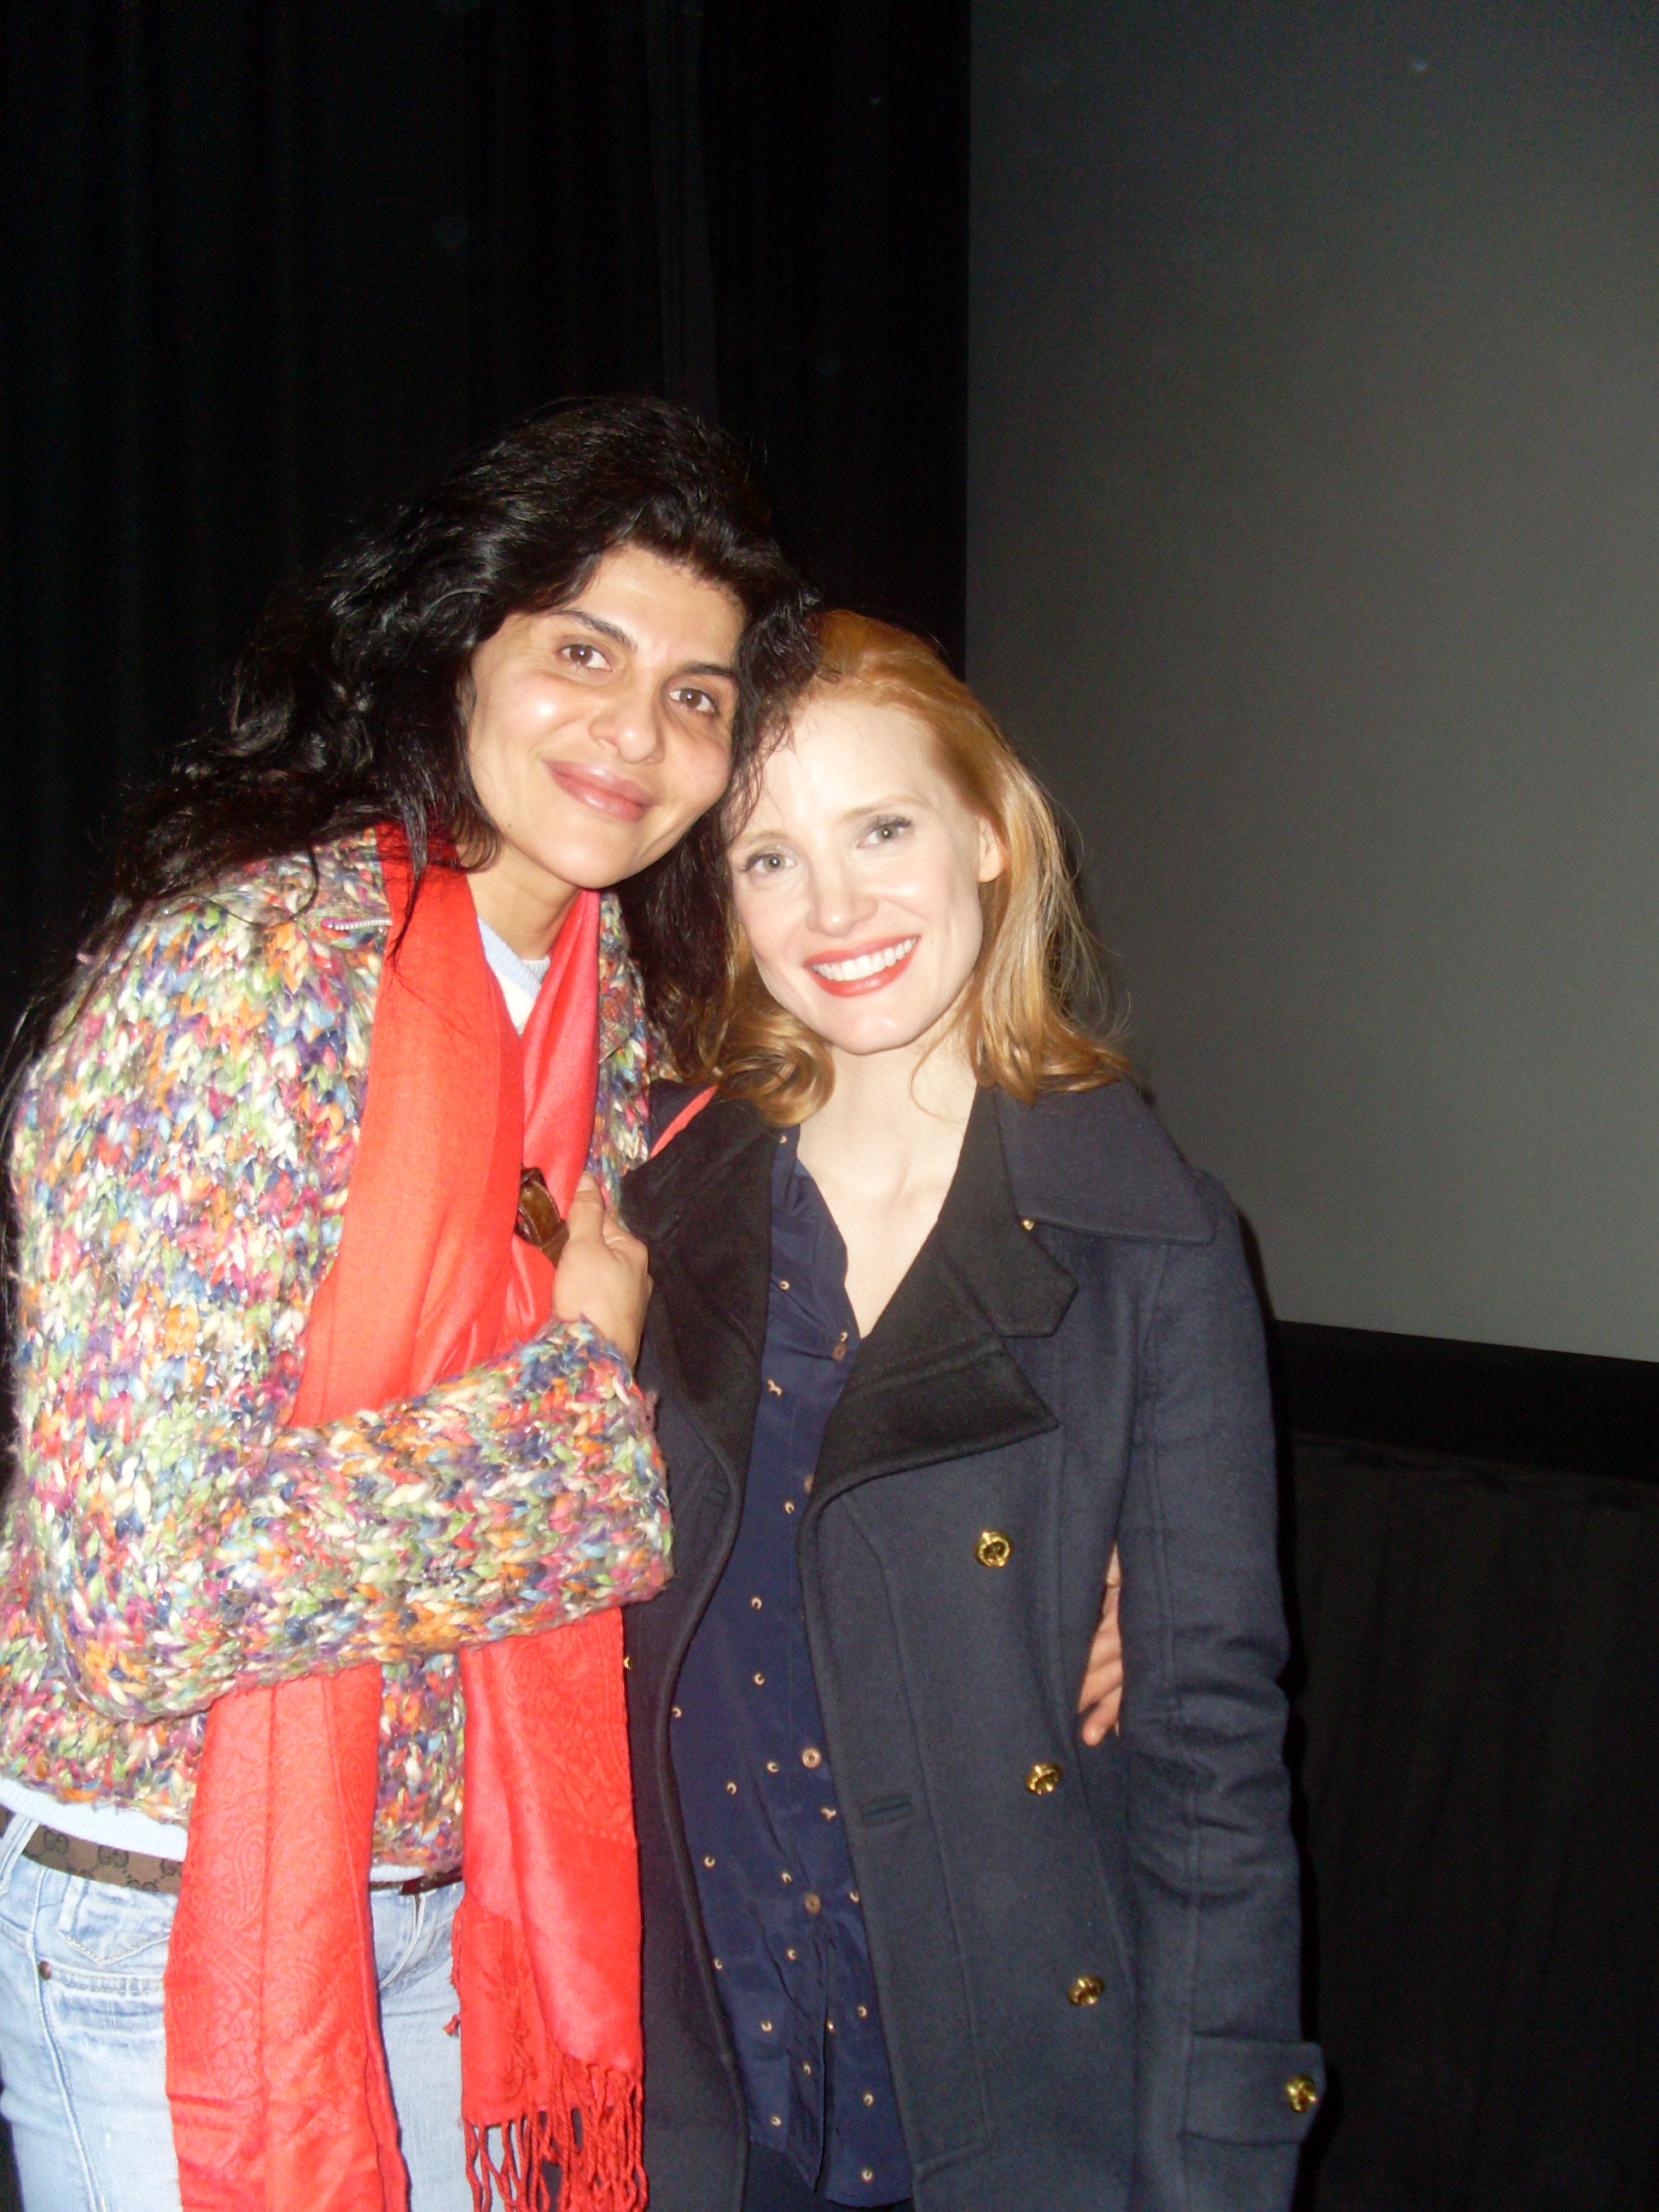 Naz Homa with actress/Producer Jessica Chastain